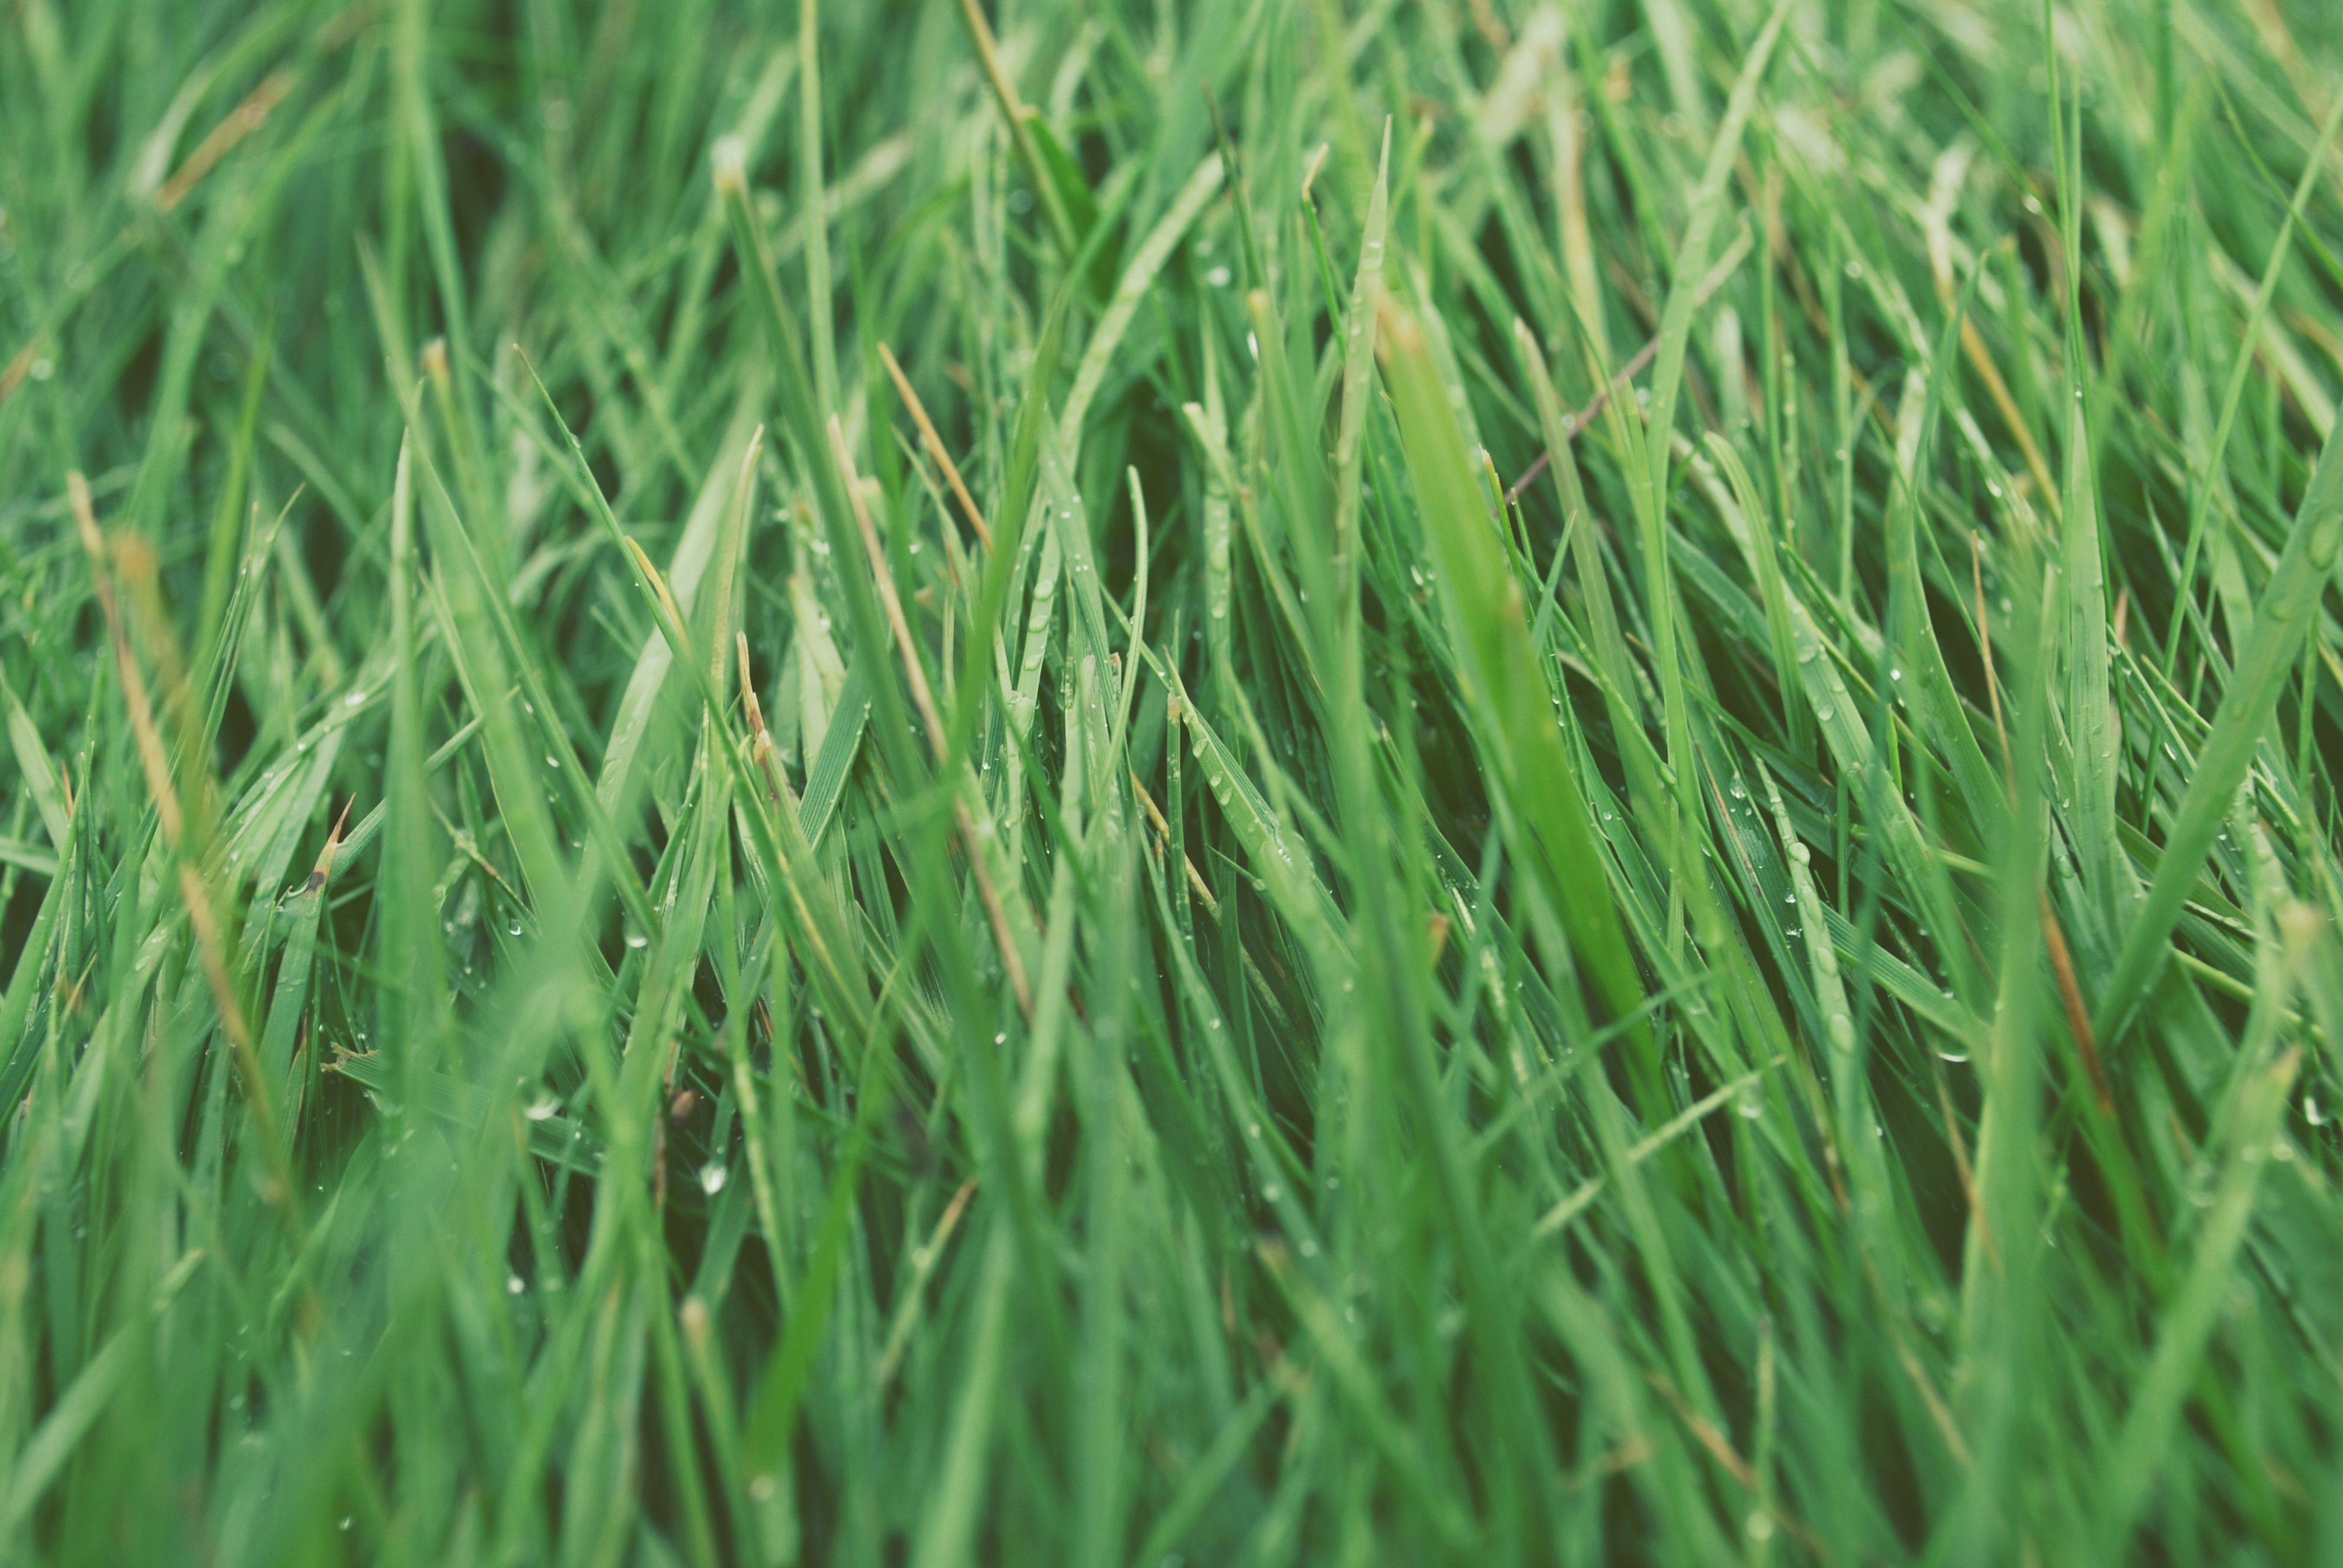 Grass Picture. Download Free Image